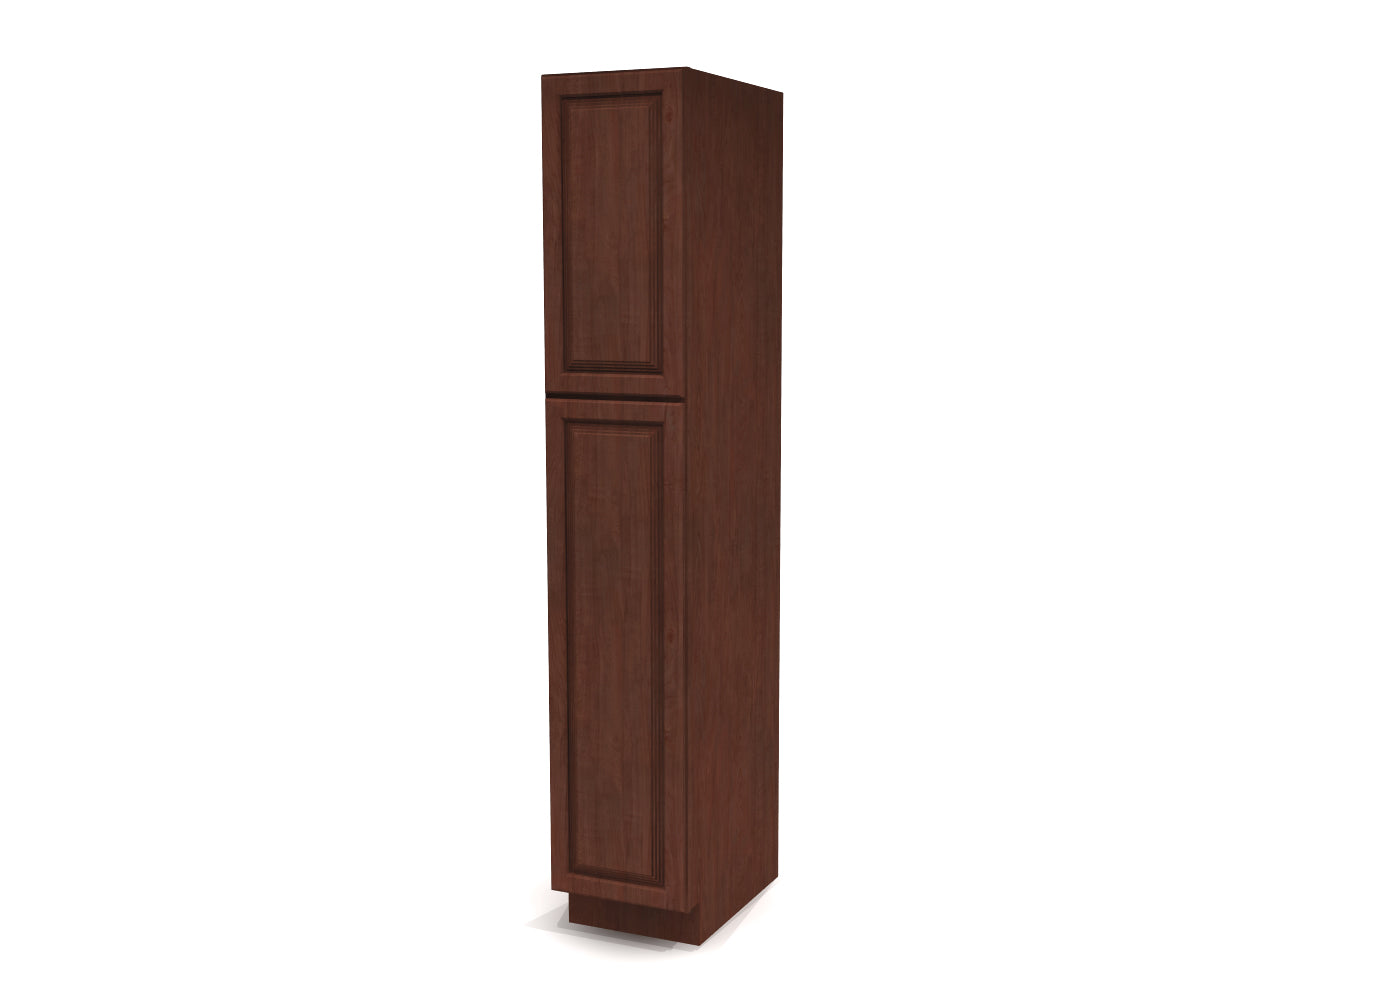 Utility Pantry Single Door 84" by 15" Wide Cherry Raised Panel Cabinet